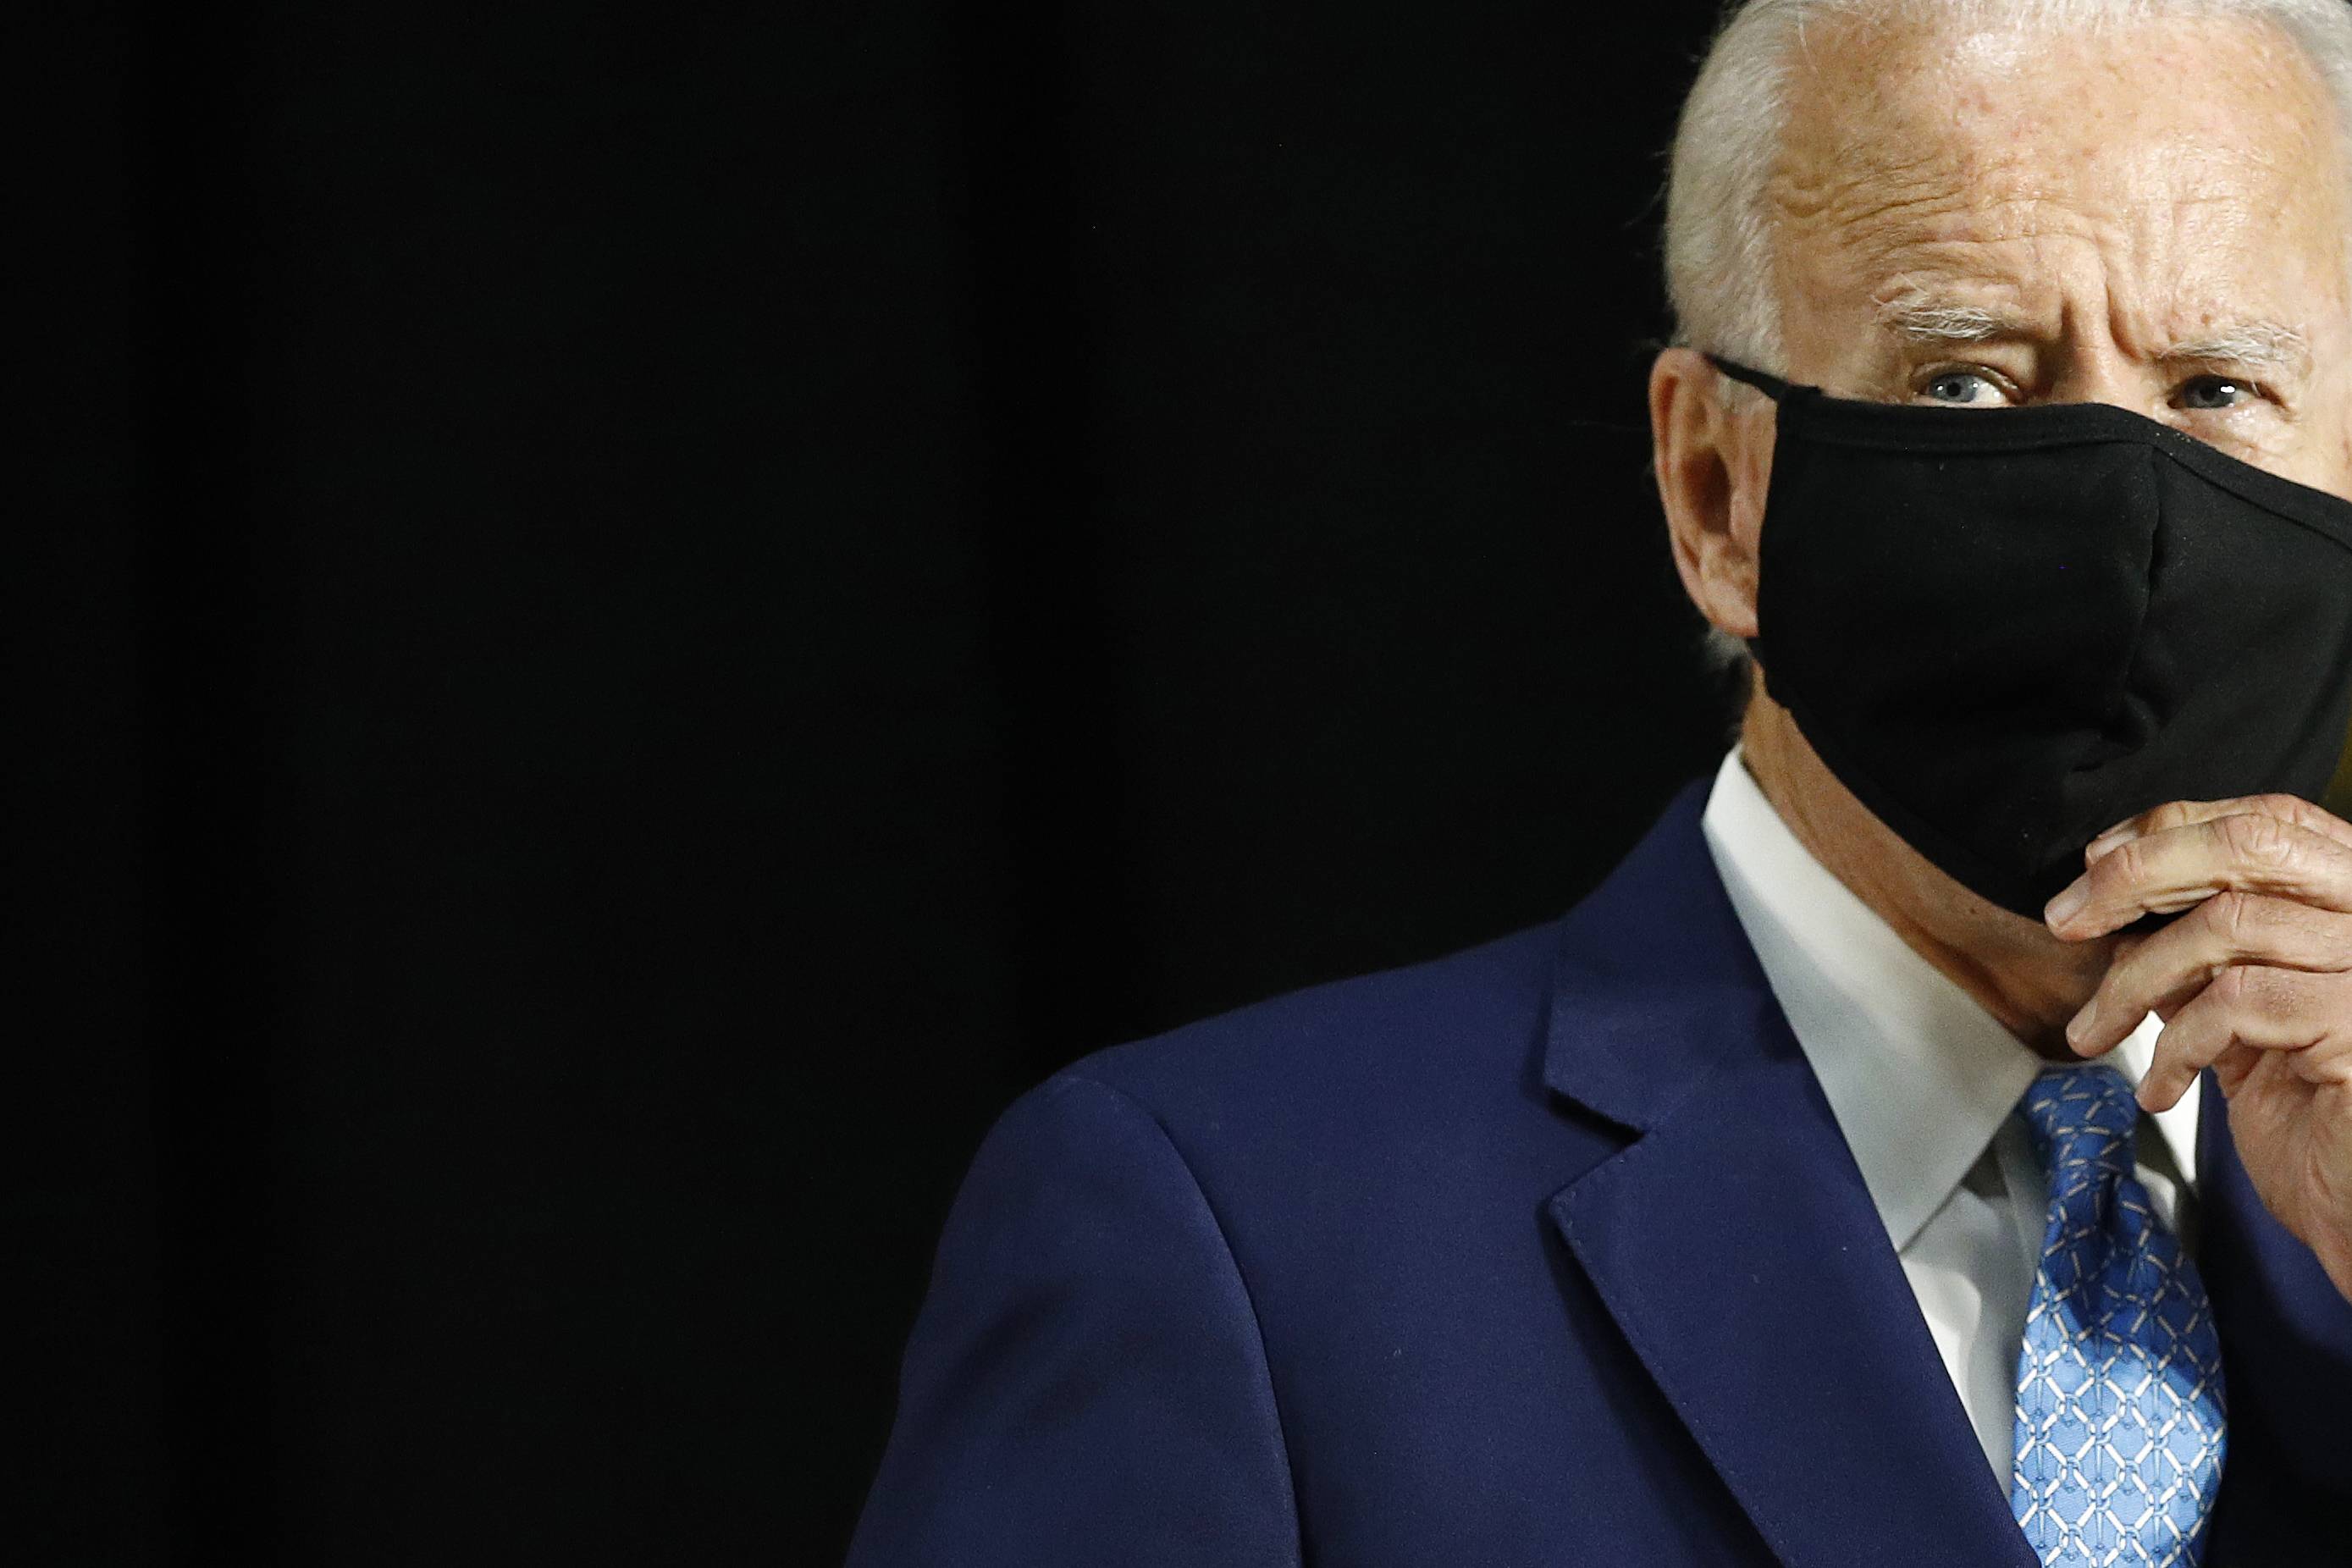 Presumptive Democratic presidential nominee Joe Biden was a supporter of U.S. military interventions while he served as a U.S. senator from 1973 to 2009 and as vice president from 2009 to 2017. | AP